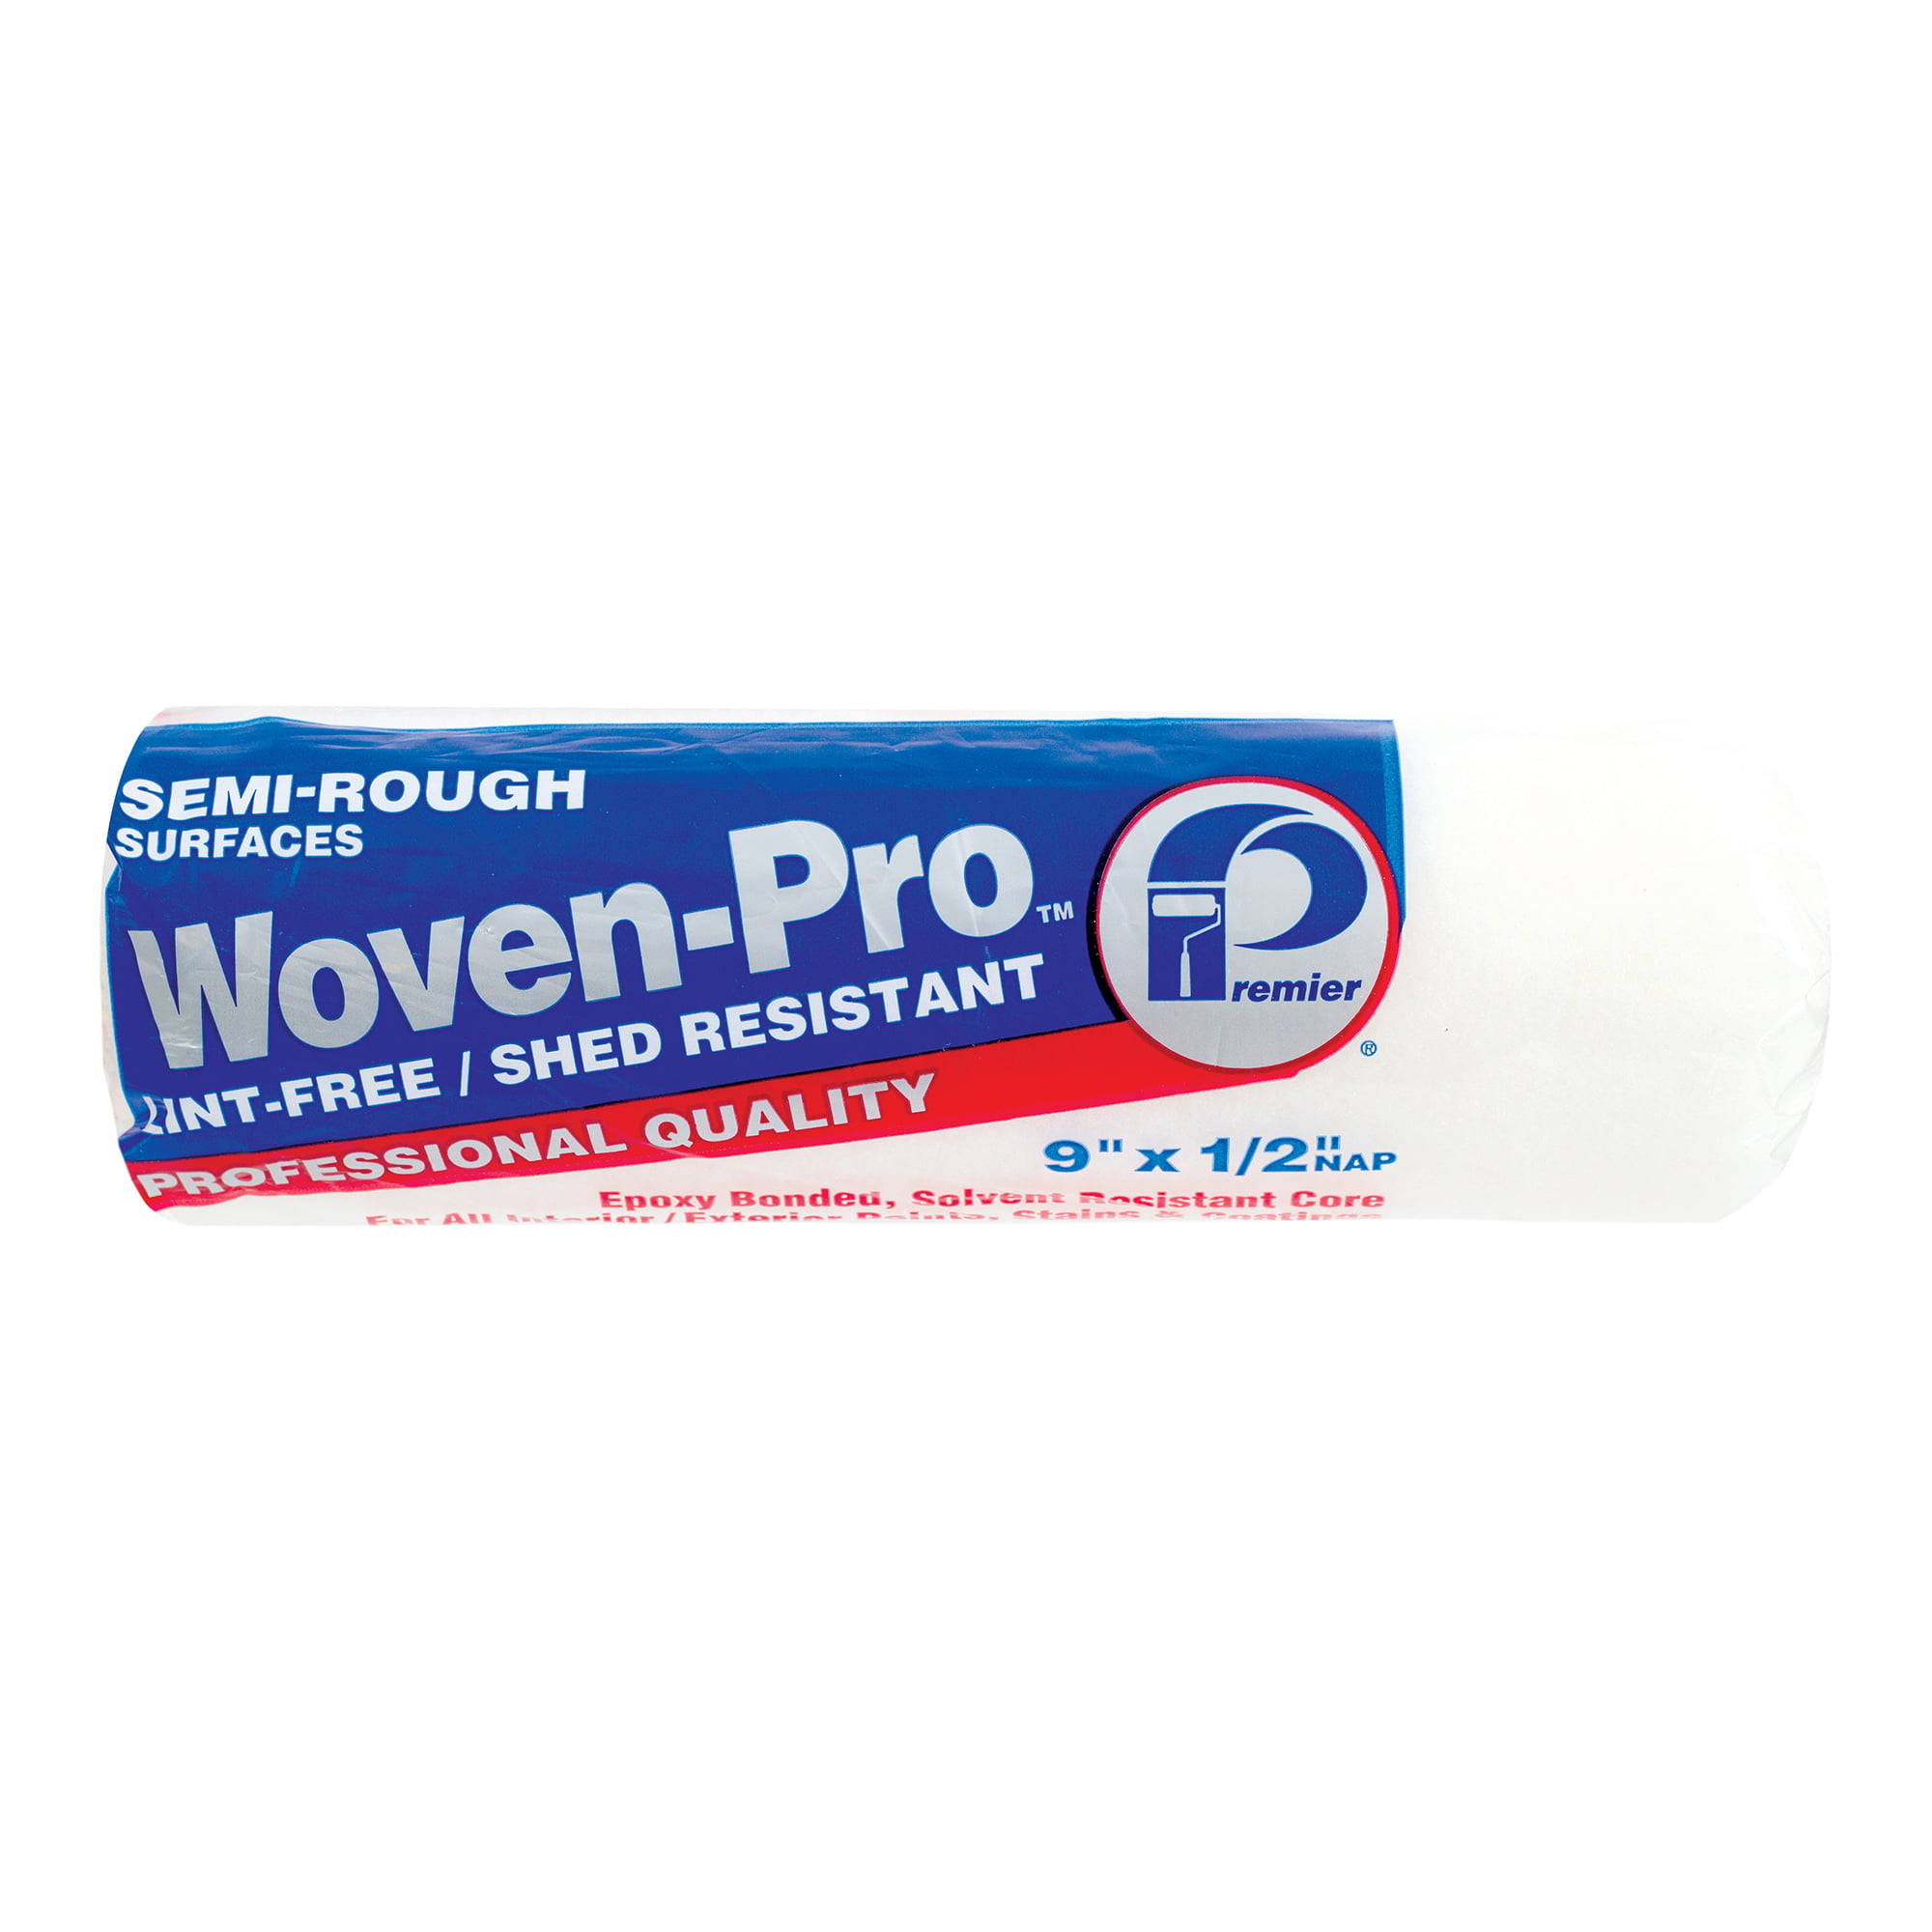 1898873 Woven-pro Polyester 0.5 X 9 In. Paint Roller Cover For Semi-rough, White - Case Of 36